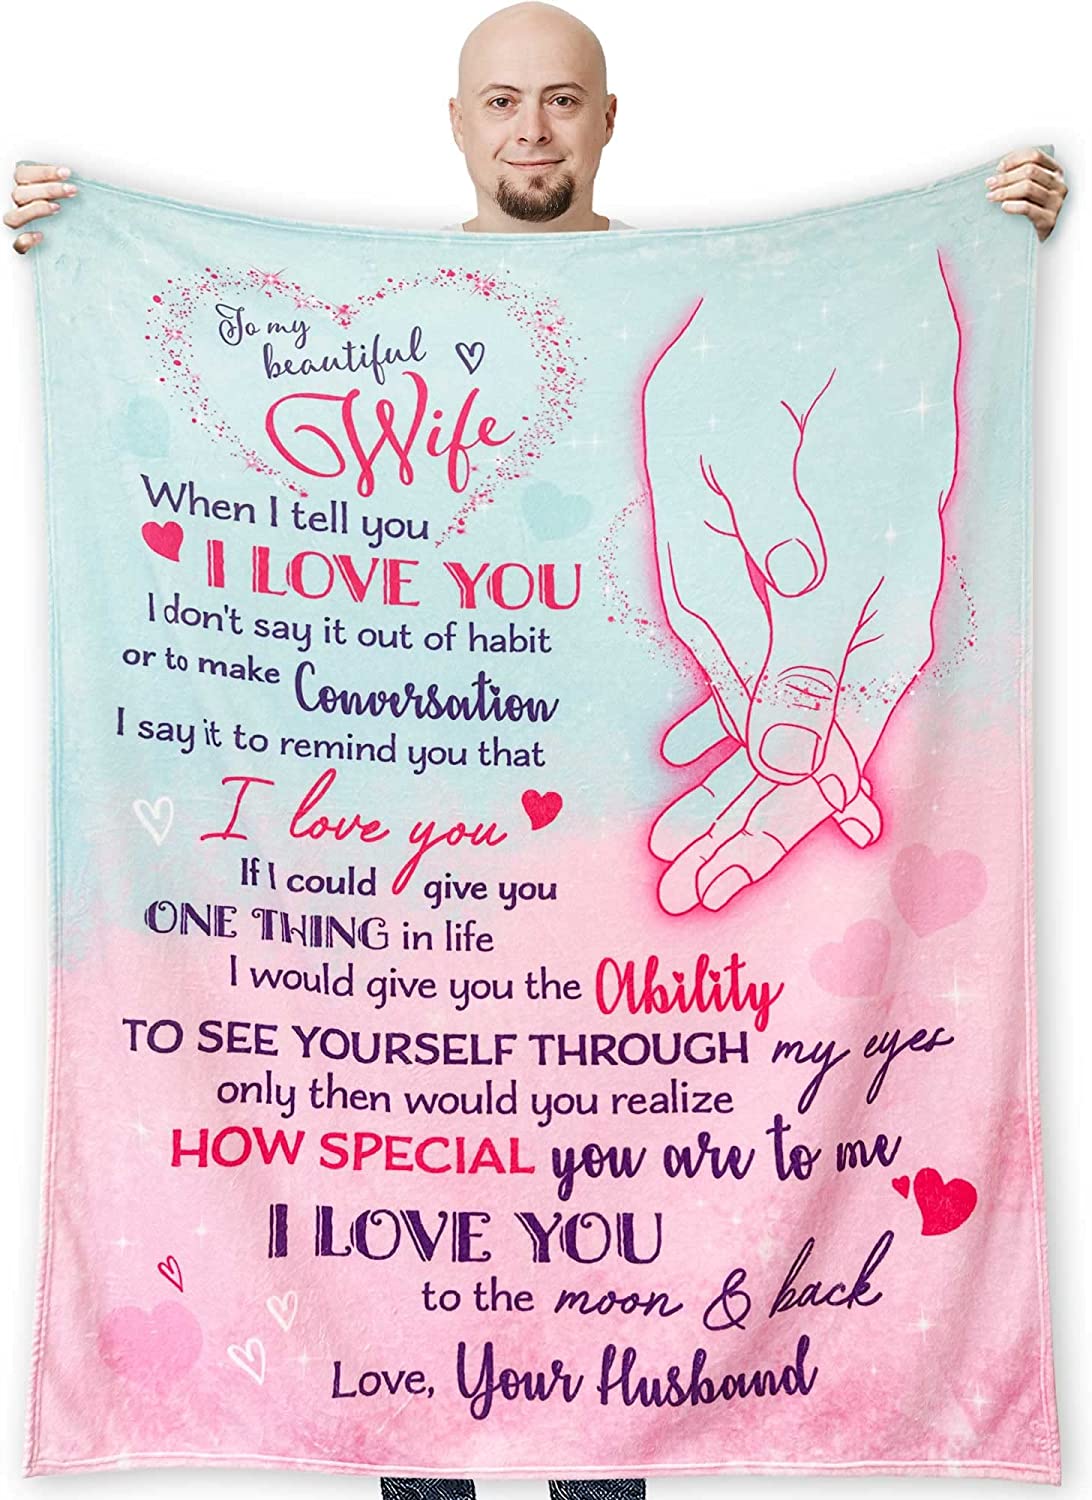 Gifts For Valentine Blanket, To My Wife Blanket From Husband, Gift For Her Valentine's Day Wedding Anniversary Christmas Romantic Gifts for Her Wife Birthday Gift Ideas Presents for Her Wife Blanket